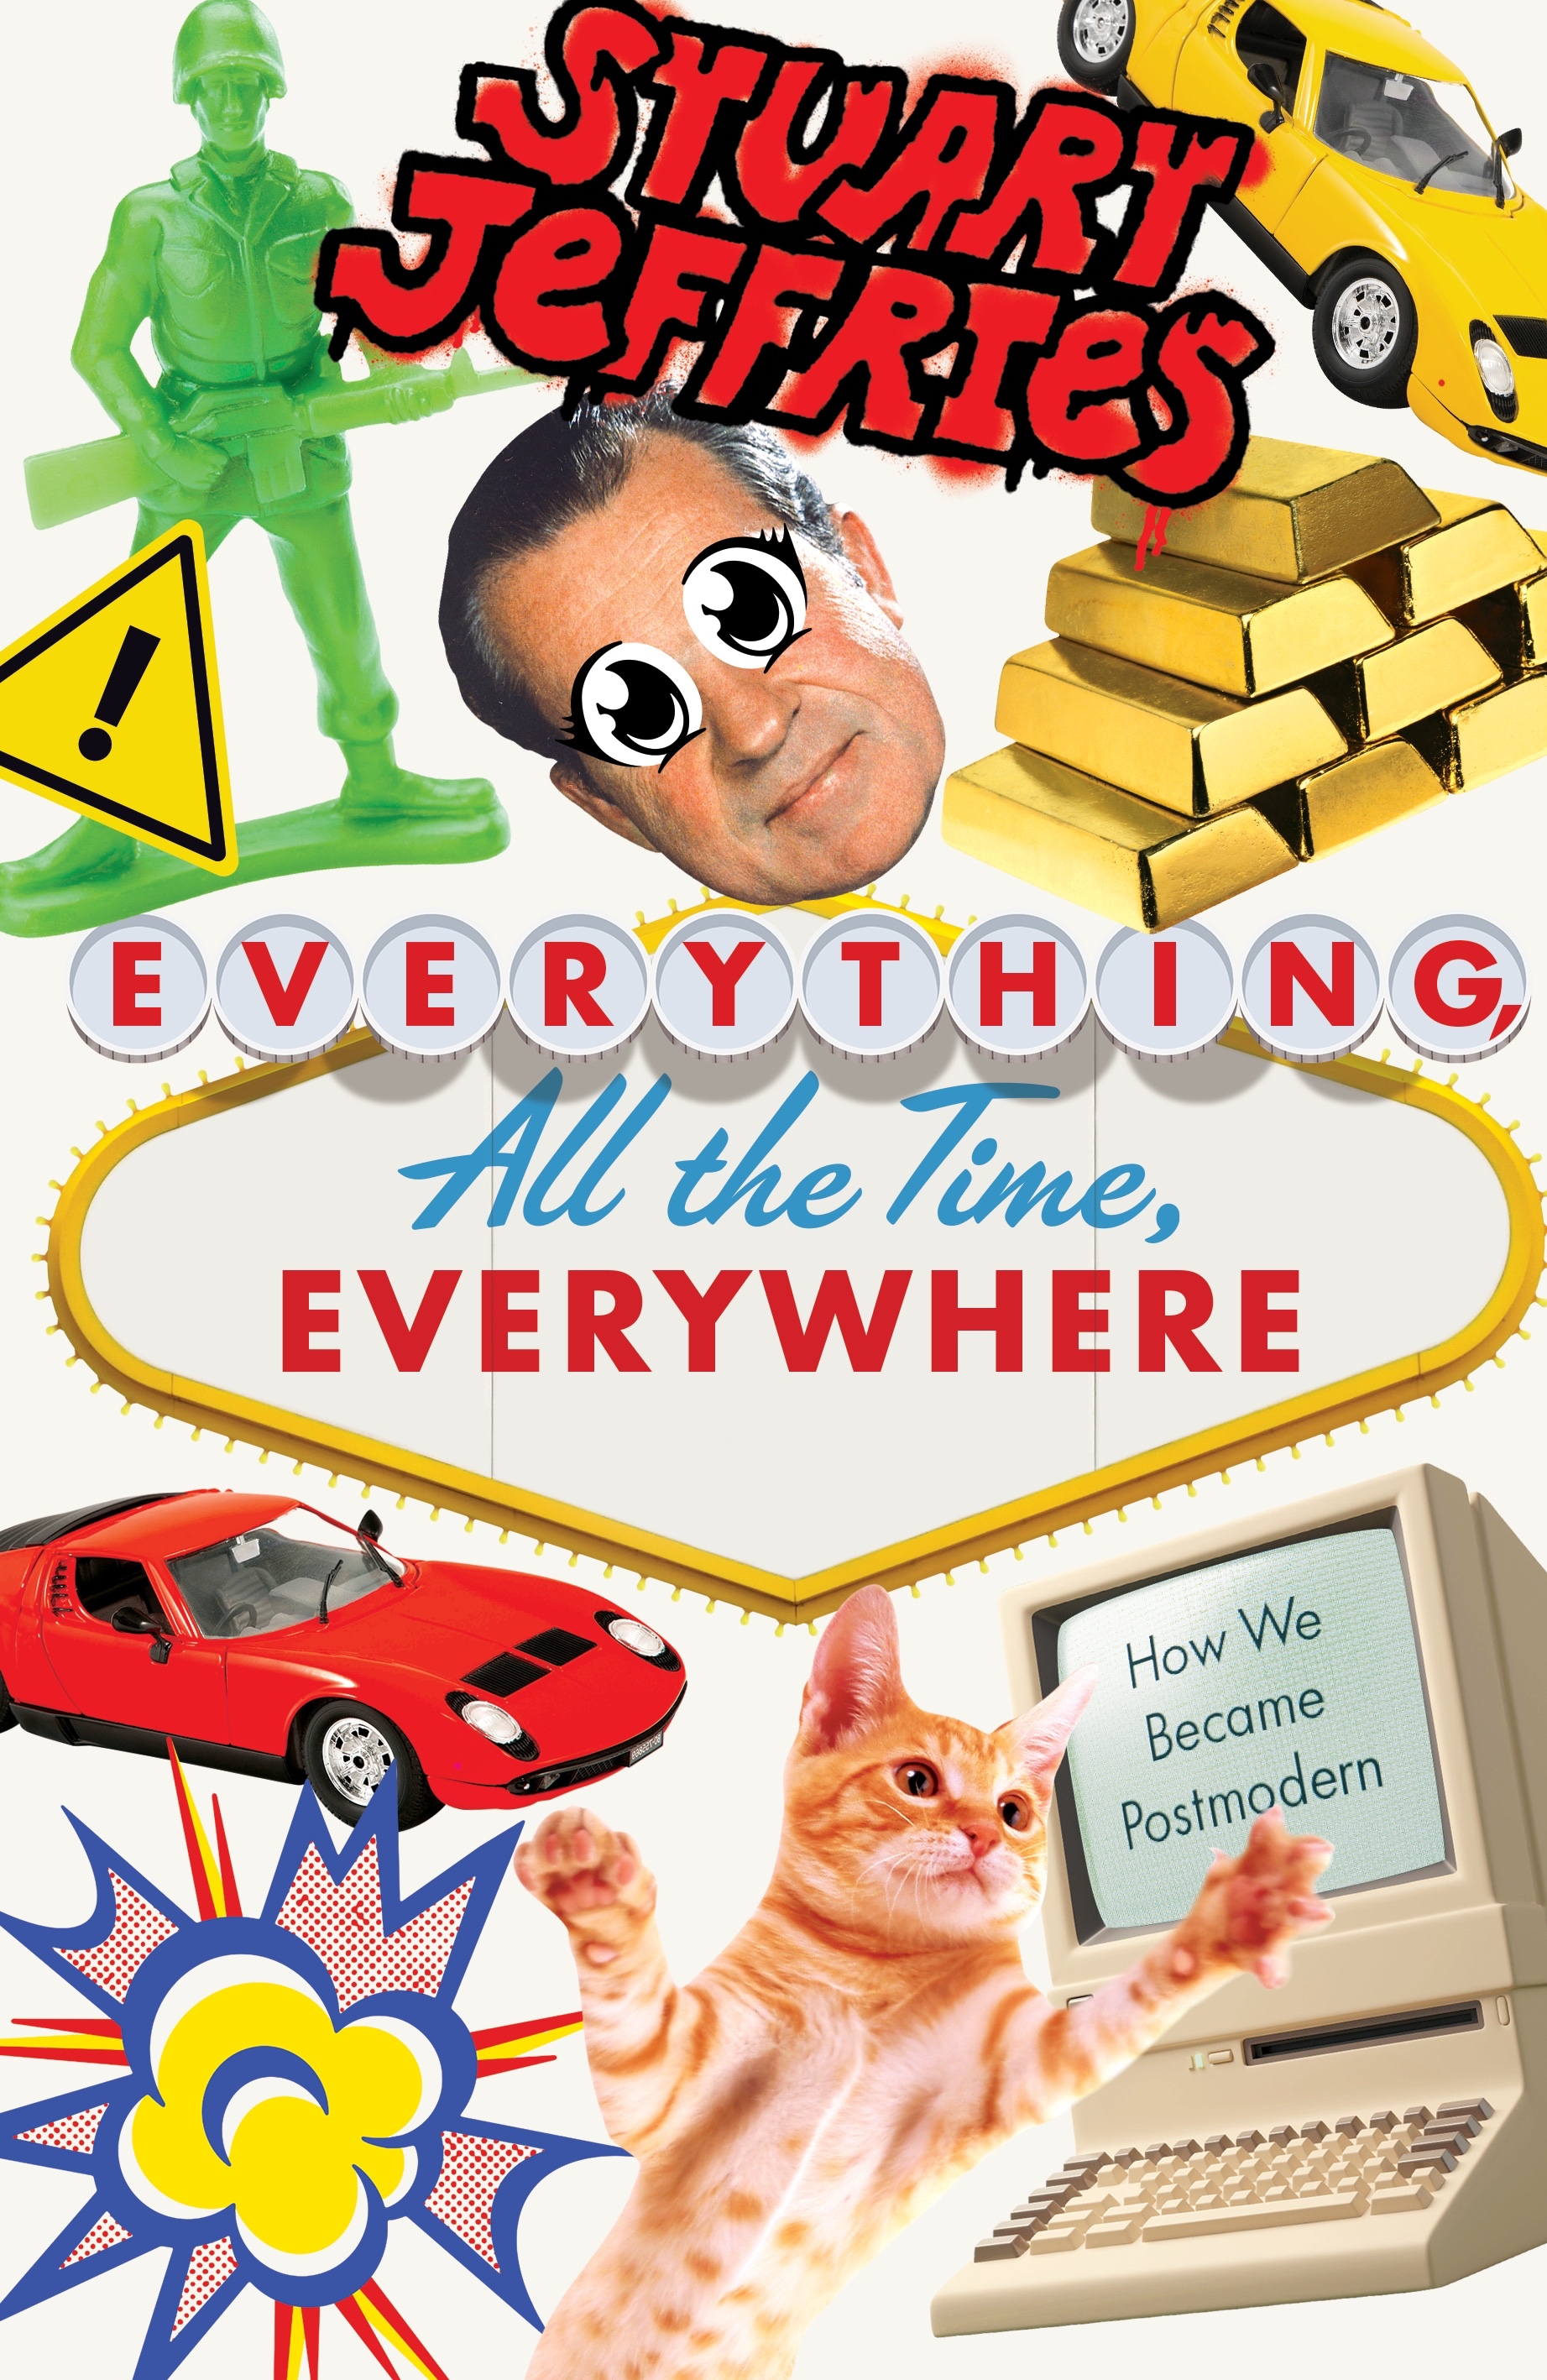 Stuart Jeffries: Everything, All the Time, Everywhere